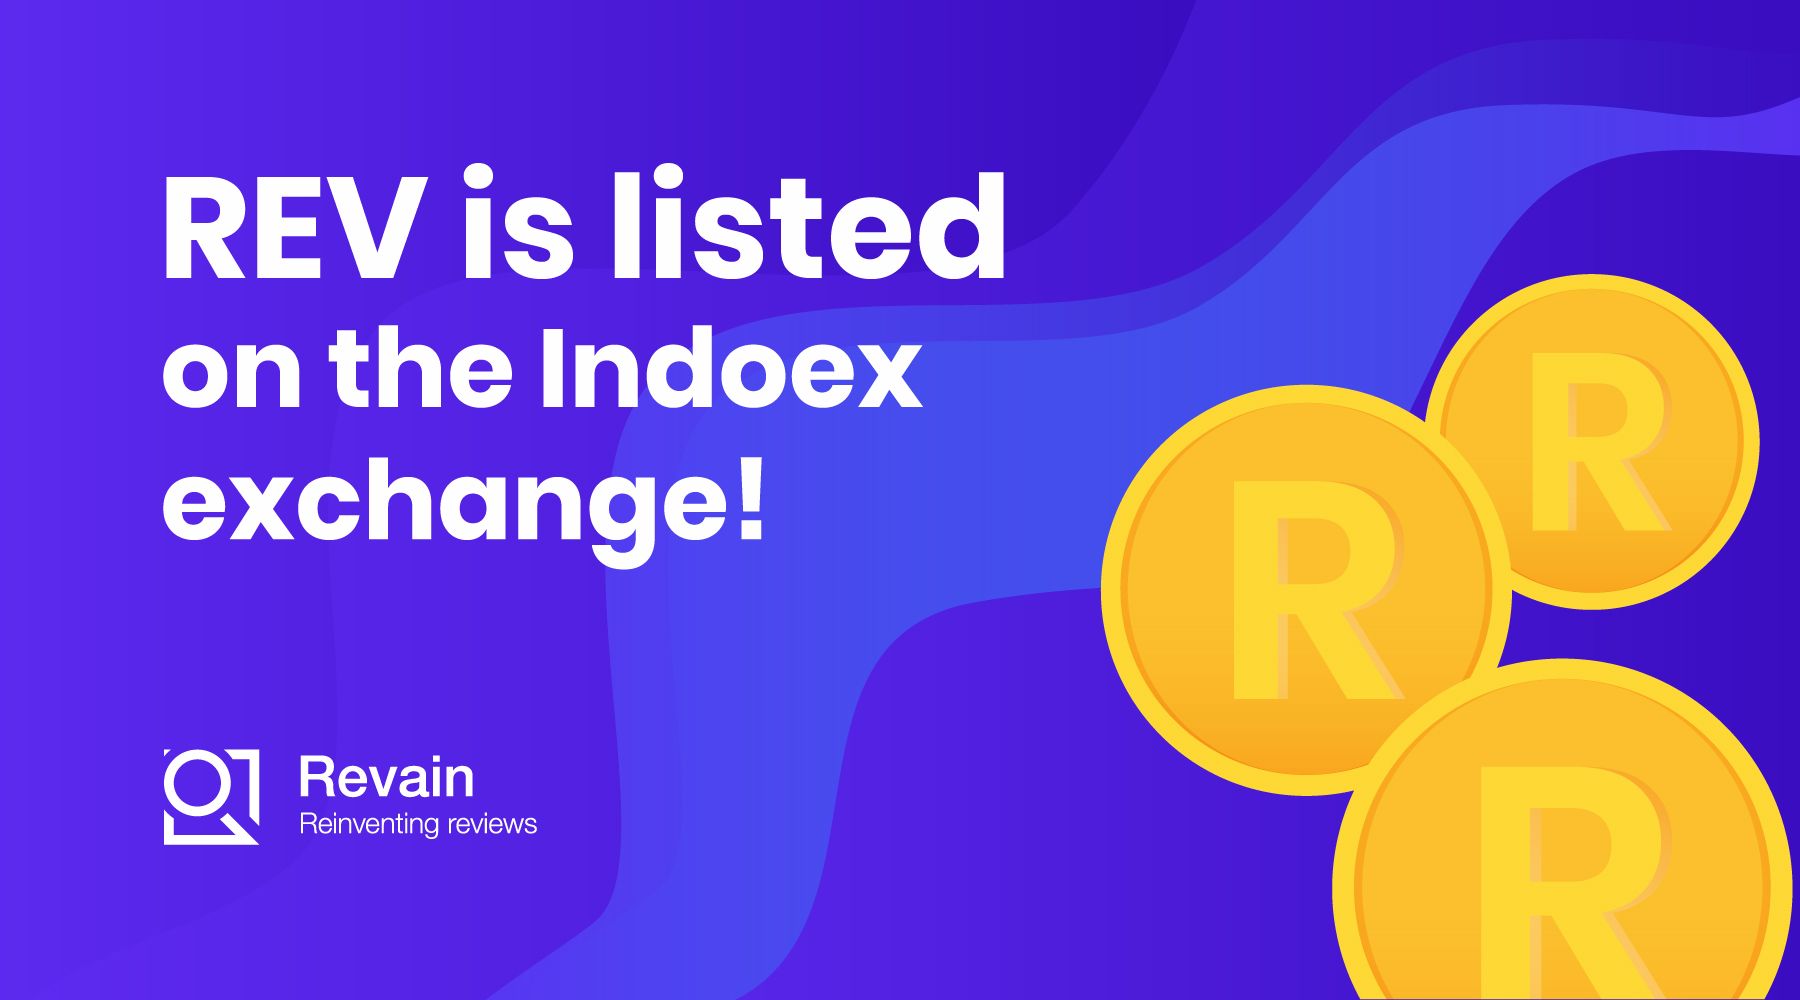 REV is listed on the Indoex exchange